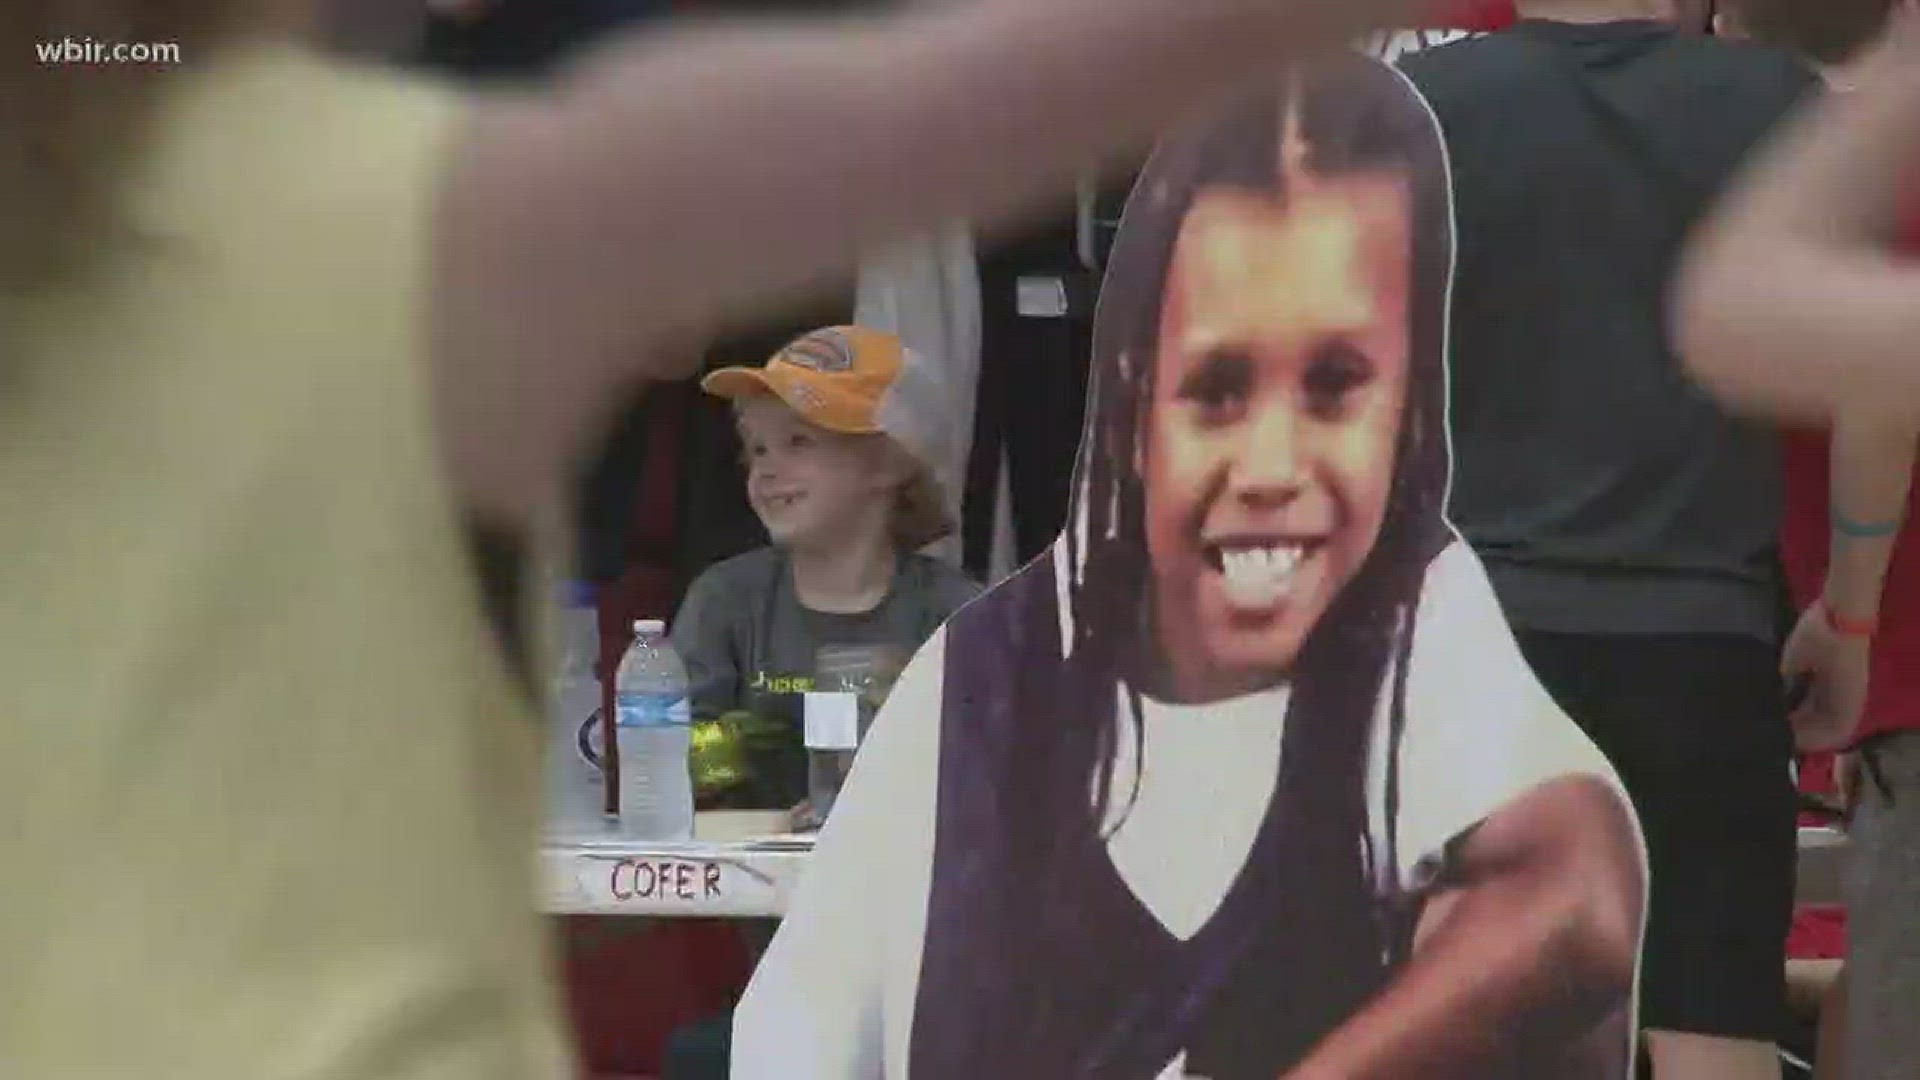 Knox County Schools hosted its second annual basketball tournament for the Jajuan Latham Memorial Scholarship Fund, two years after Latham passed away in a shooting.